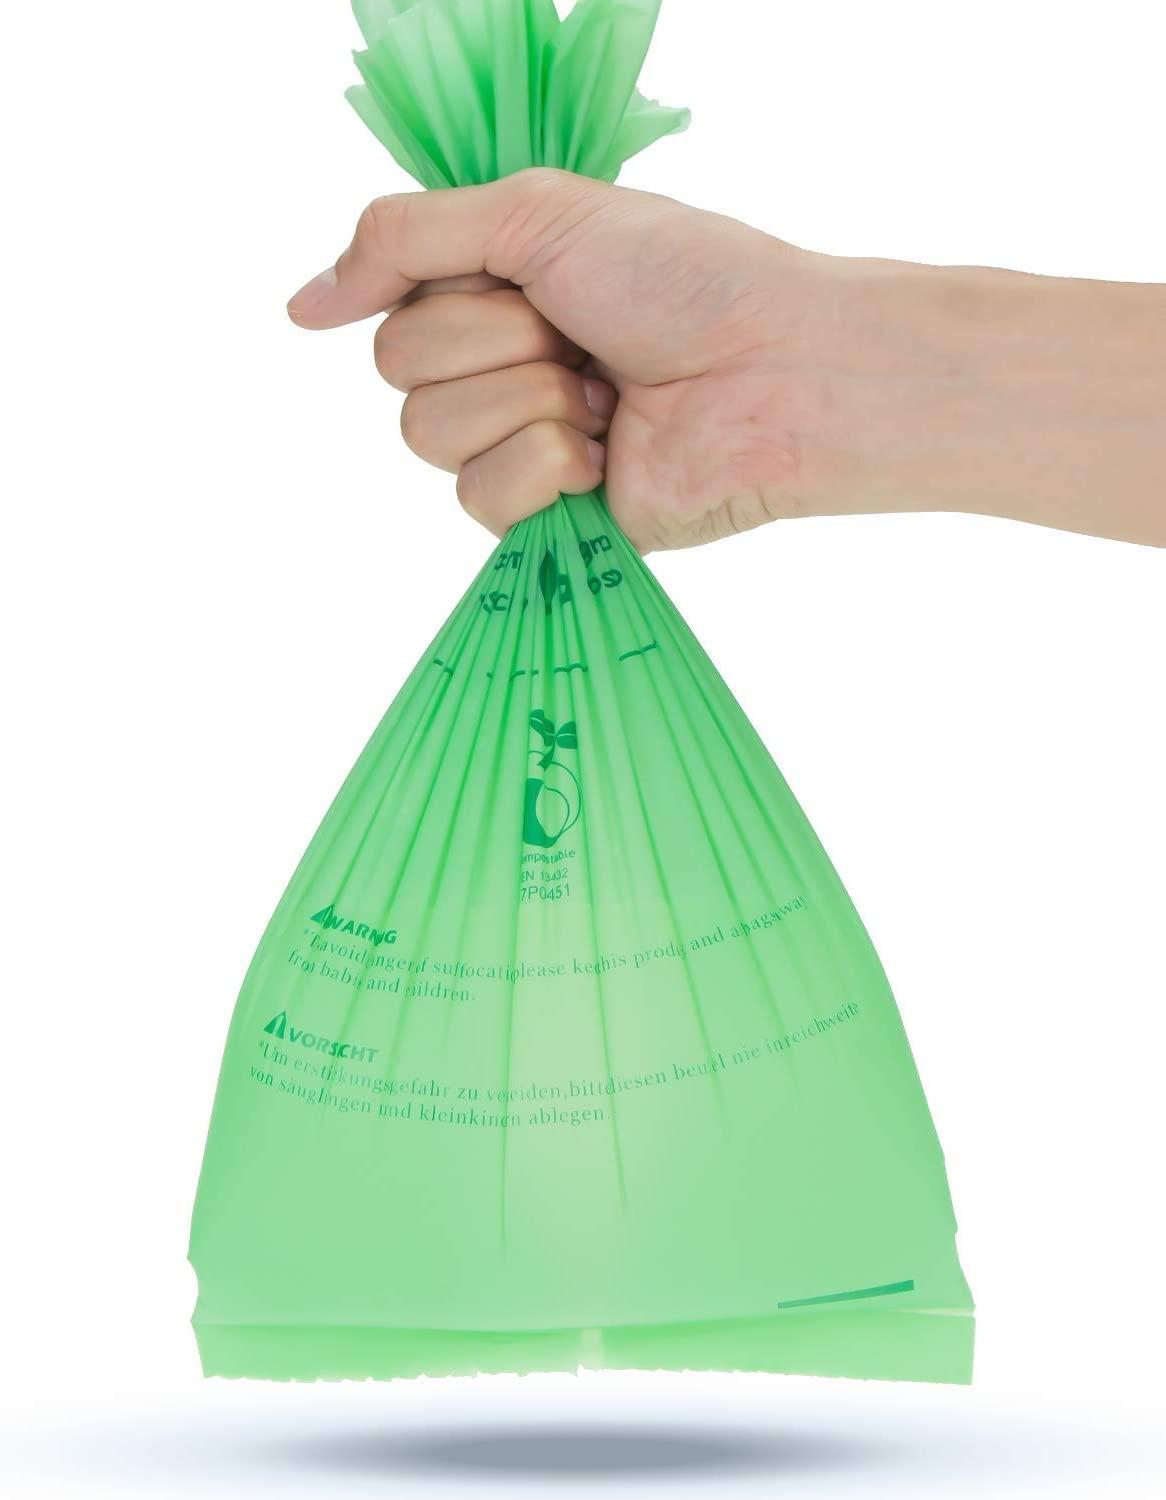 GREENER WALKER 25% Extra Thick Compostable Trash Bags, 1.6 Gallon-120Bags,  ASTM D6400 BPI Biodegradable